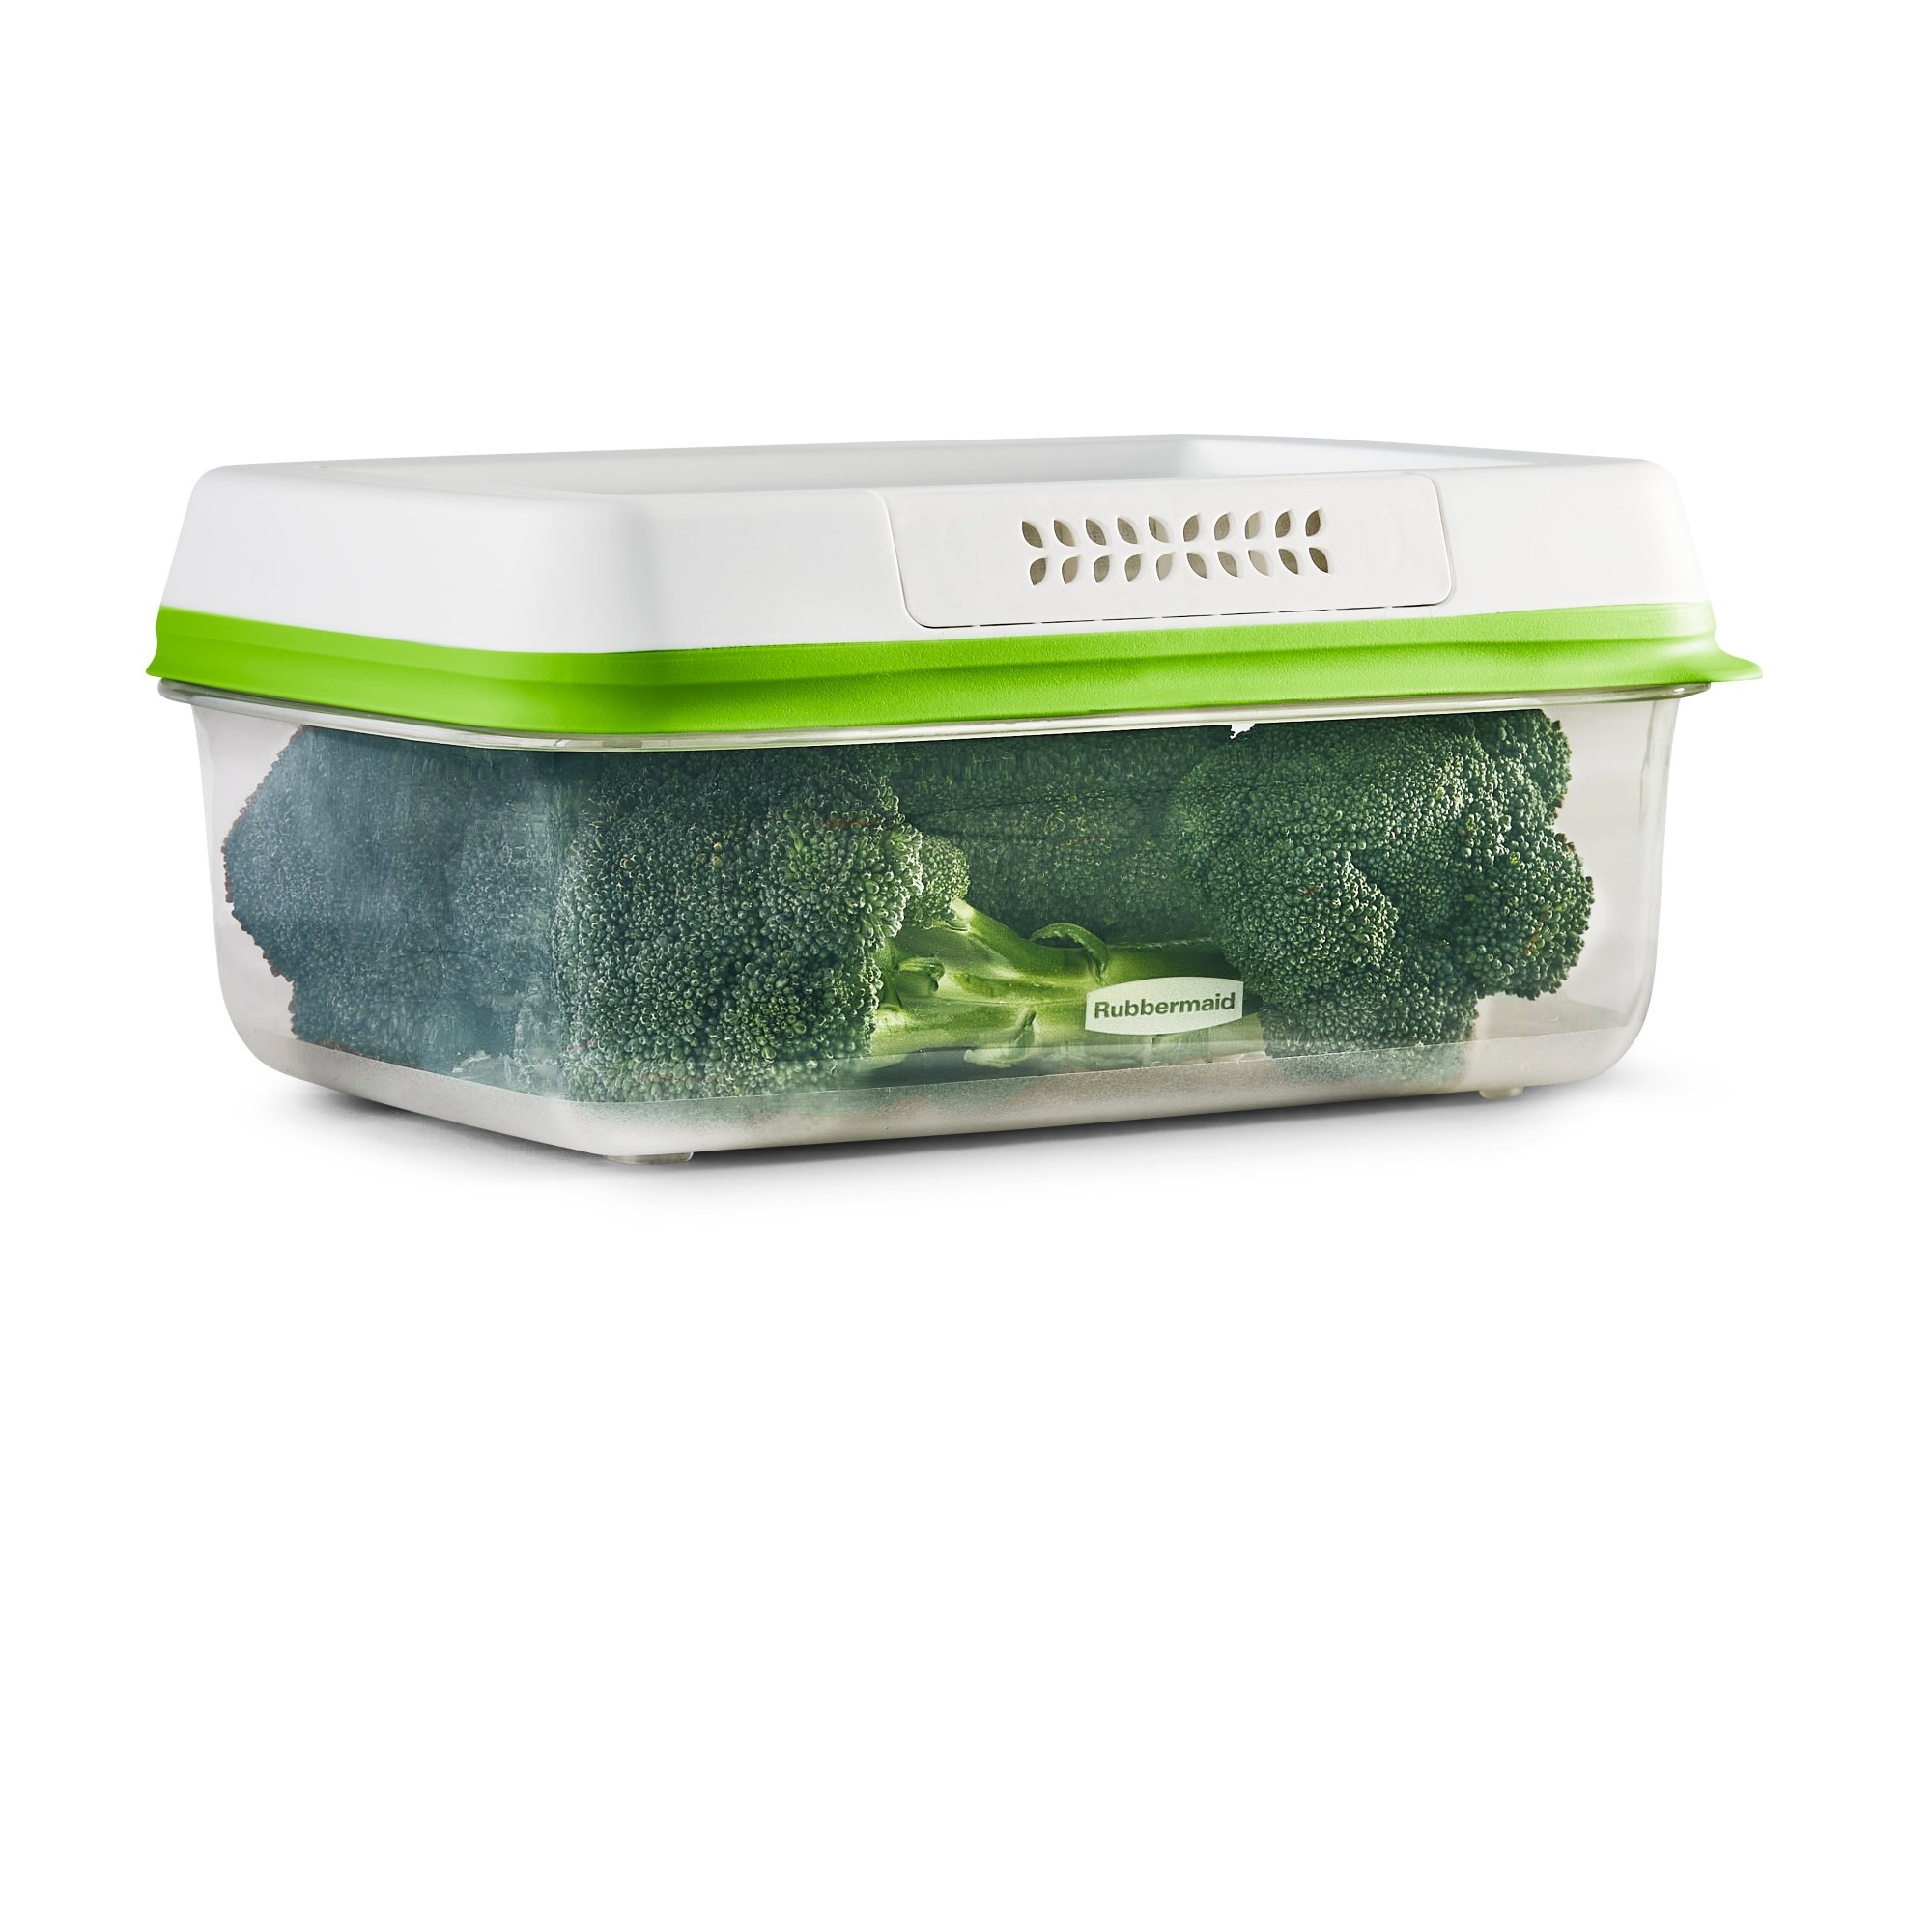 https://s7d9.scene7.com/is/image/NewellRubbermaid/2114816-rubbermaid-food-storage-green-11.3c-large-short-with-food-angle?wid=2000&hei=2000